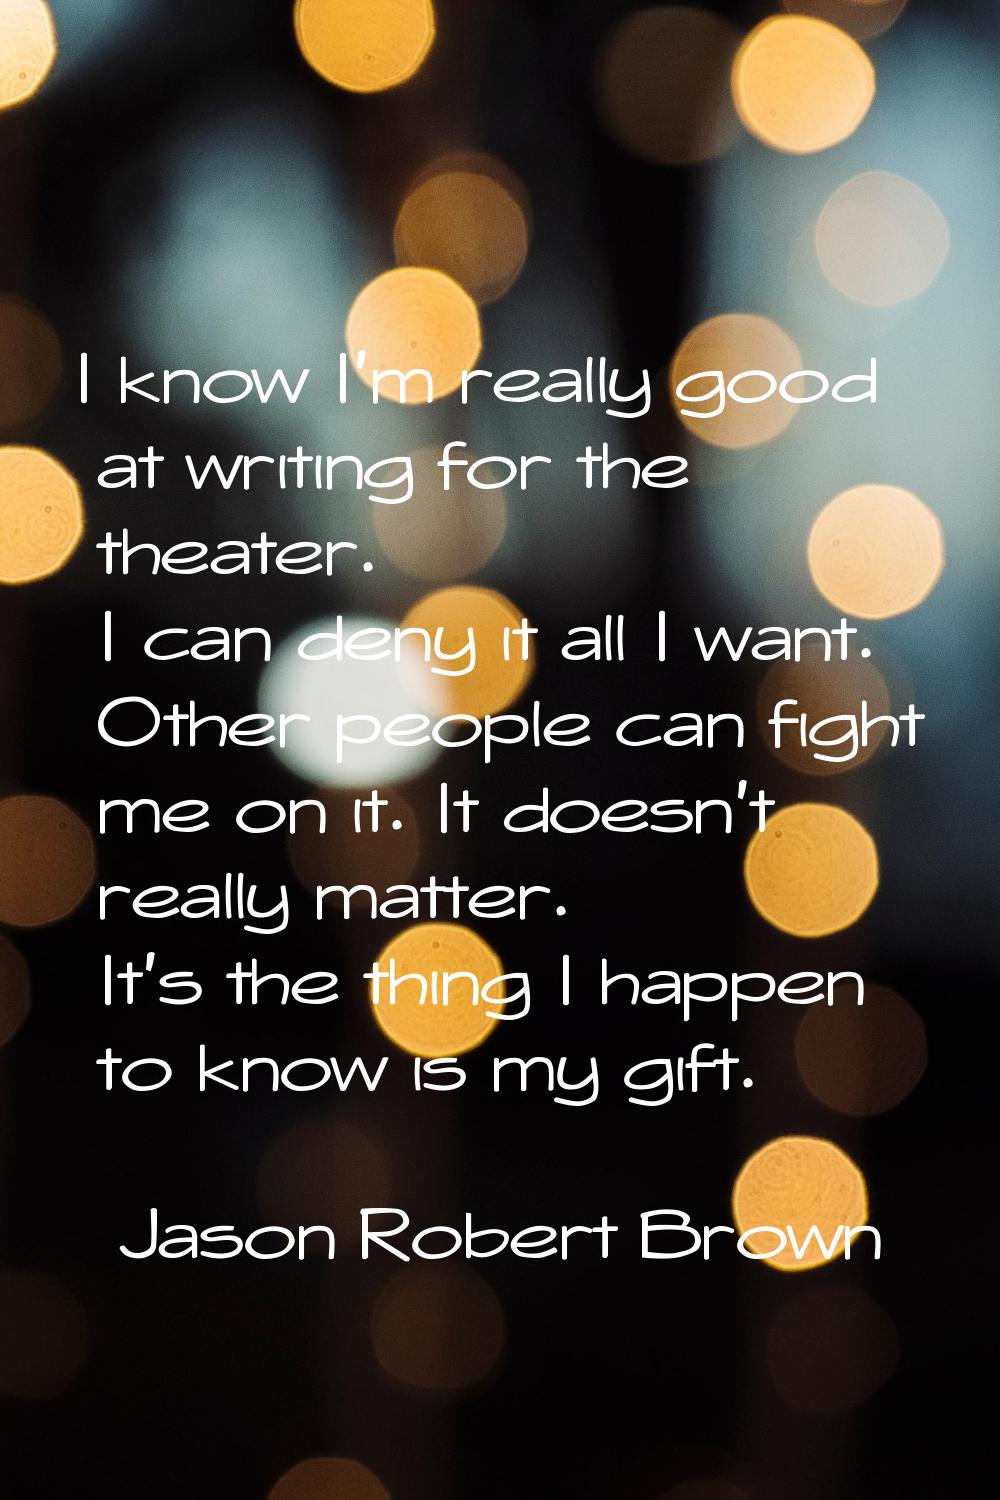 I know I'm really good at writing for the theater. I can deny it all I want. Other people can fight